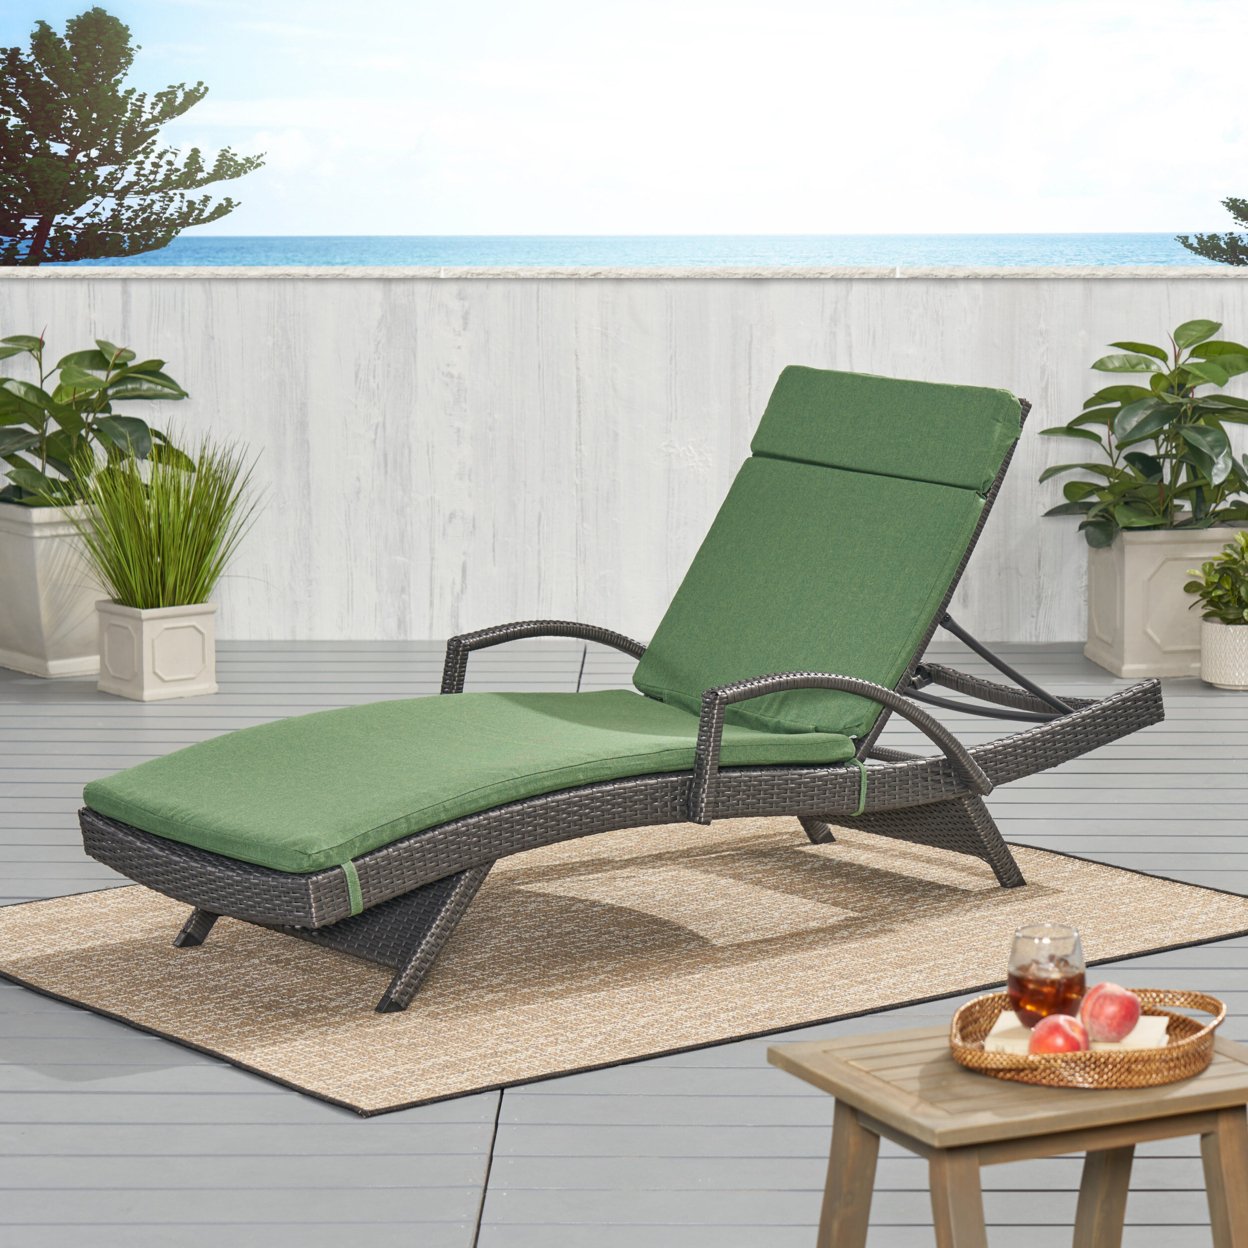 Soleil Outdoor Water Resistant Chaise Lounge Cushion - Jungle Green